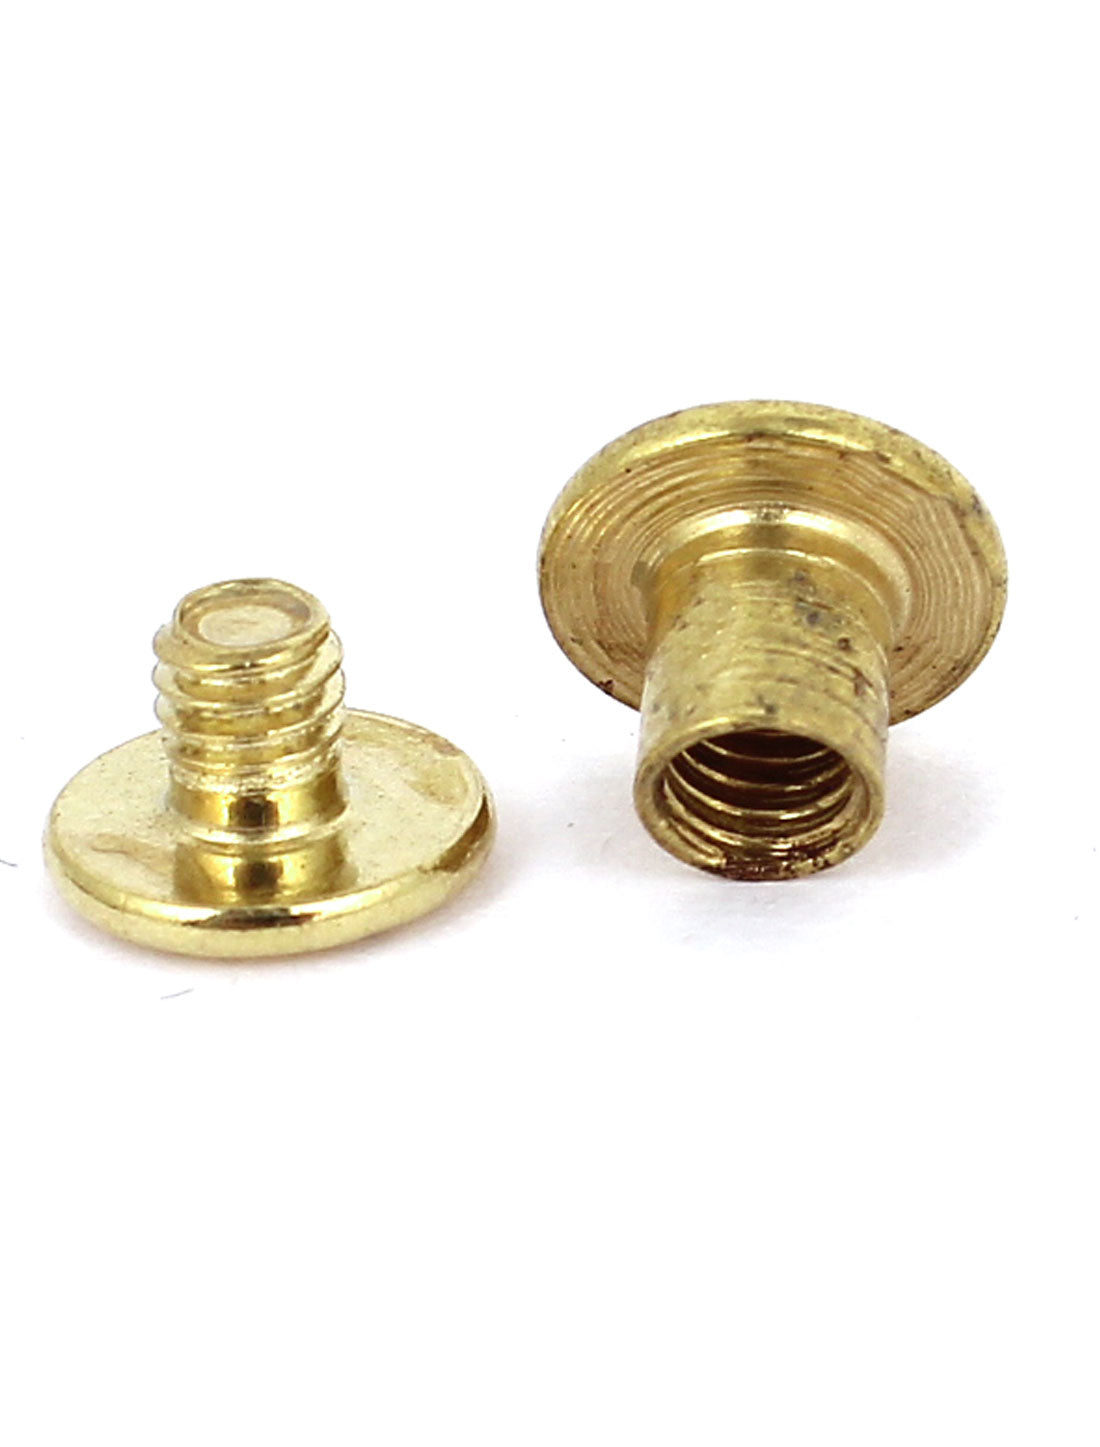 uxcell Uxcell Brass Plated 5x6mm Binding Chicago Screw Post 30pcs for Album Leather Purse